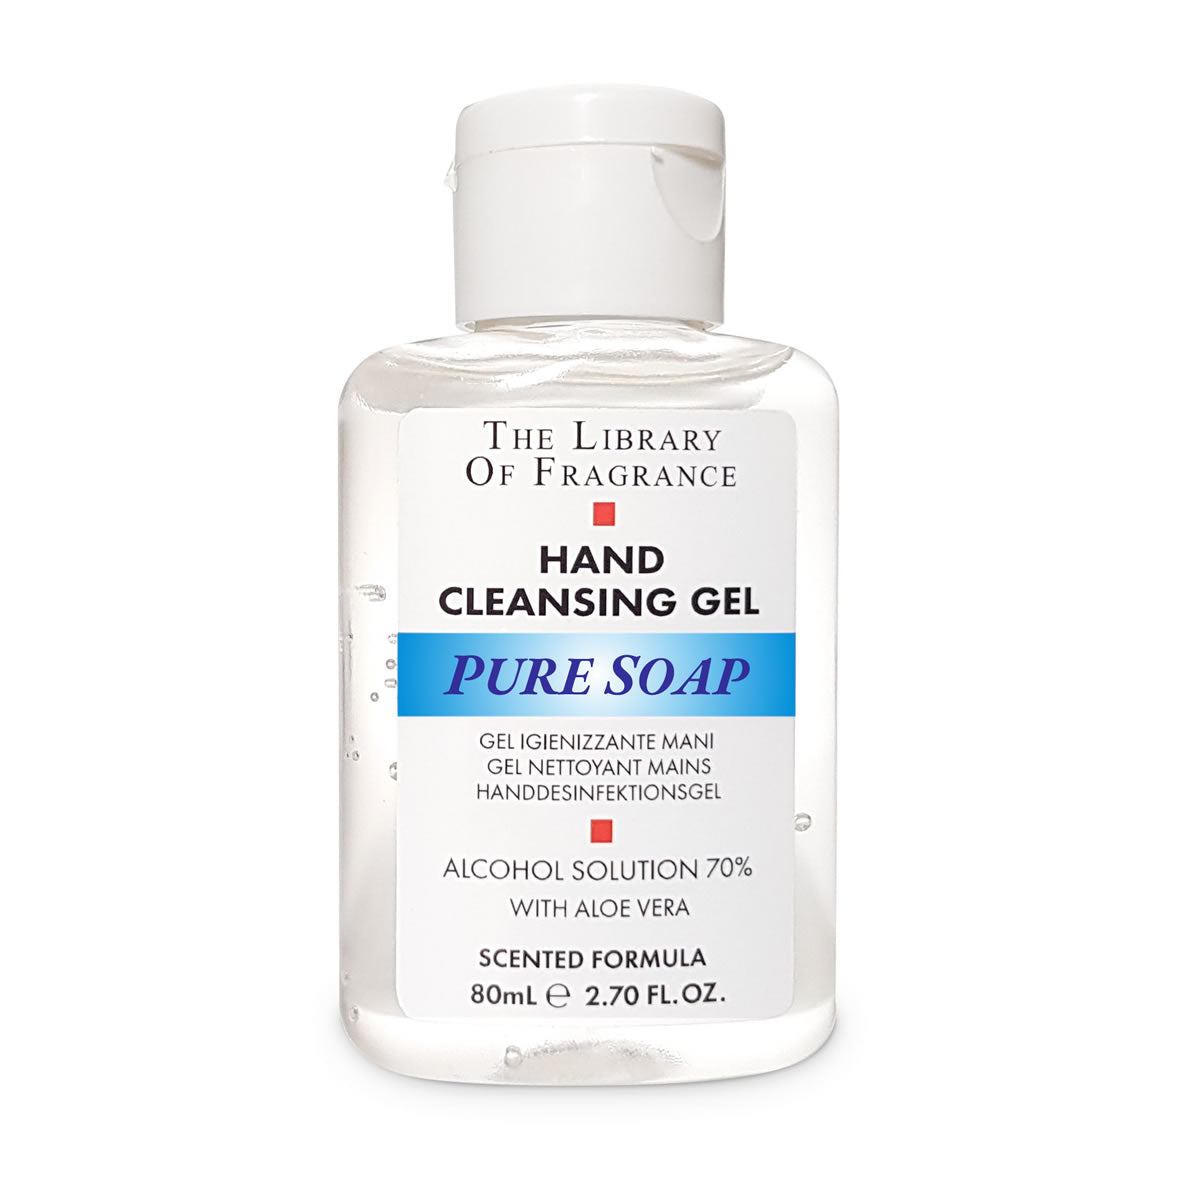 The Library of Fragrance Pure Soap Hand Cleansing gel 80ml AKA Demeter Fragrance